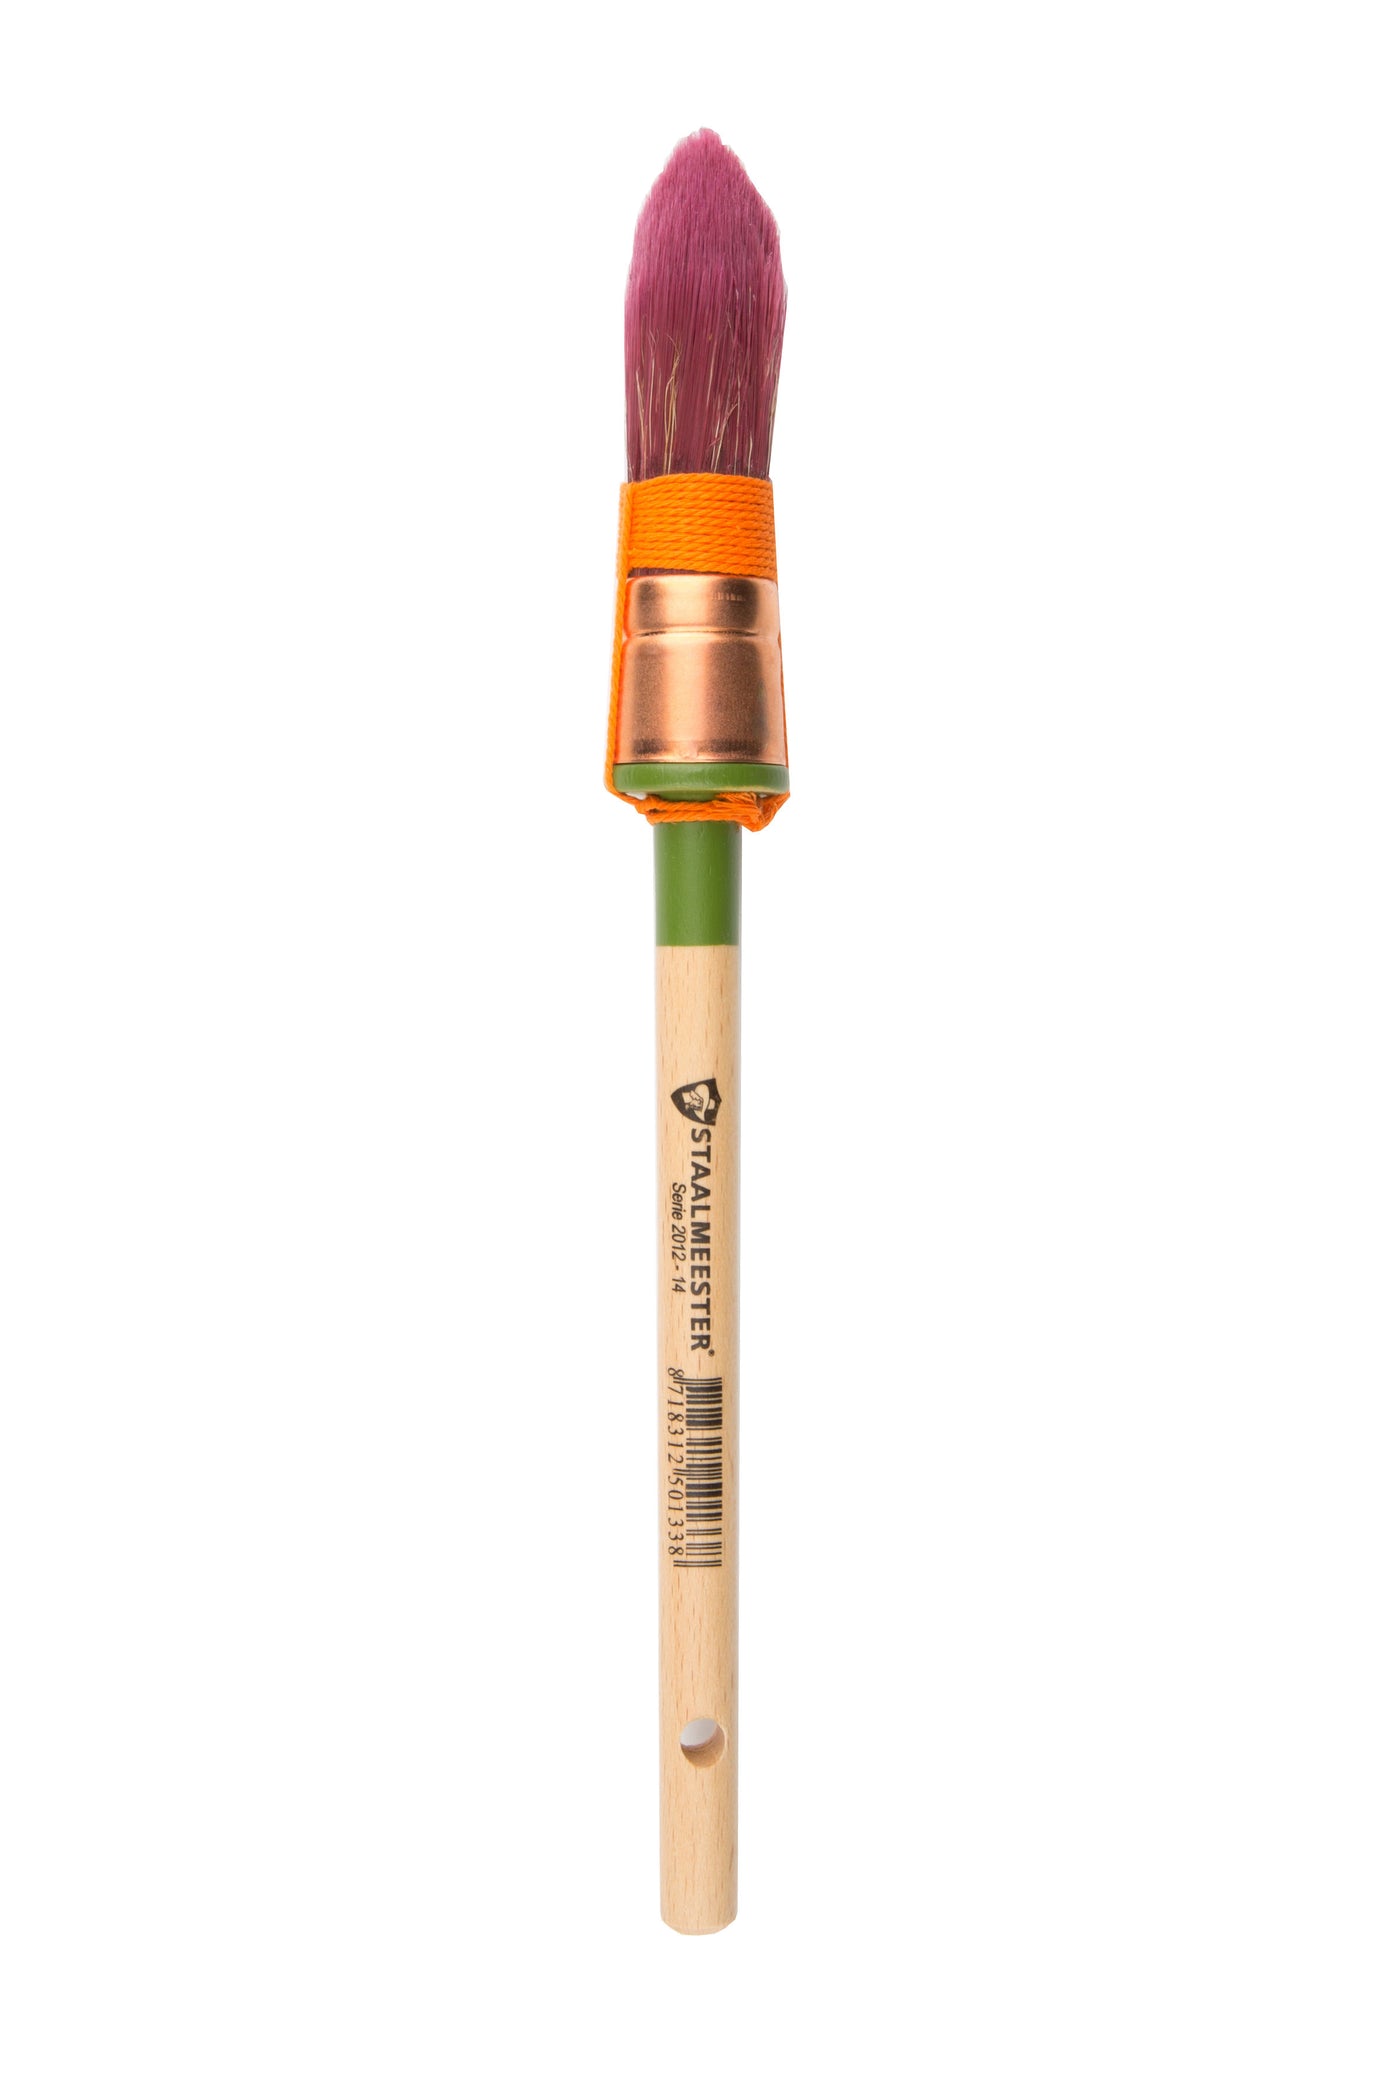 Staalmeester pointed paint brush synthetic and natural bristle For the Love Creations Aussie retailer